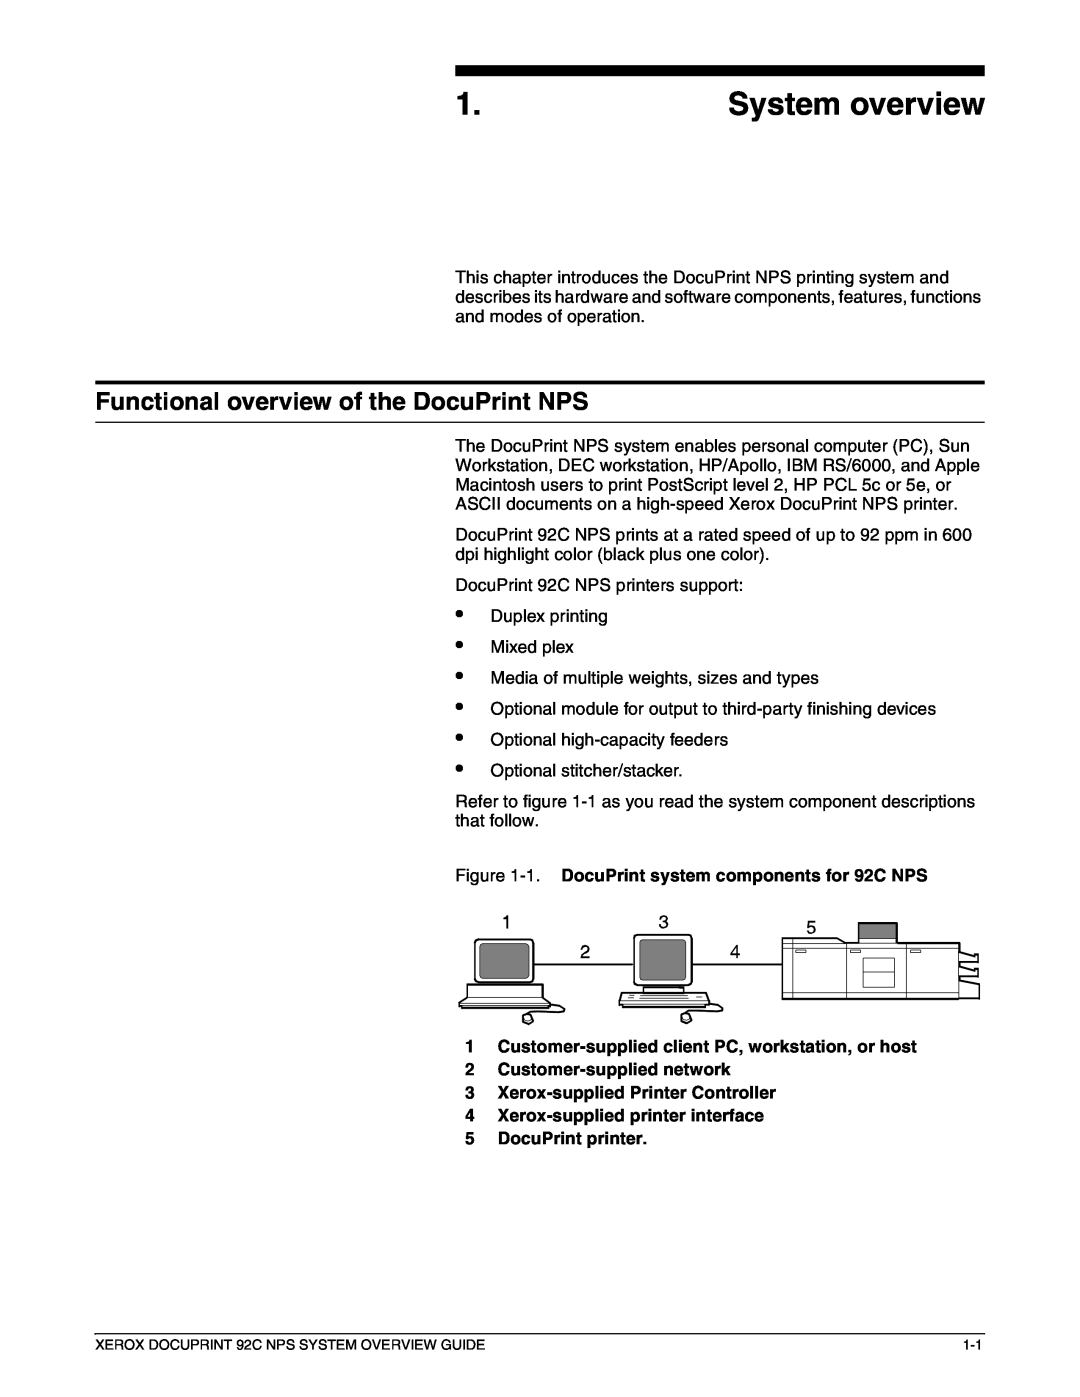 Xerox manual System overview, Functional overview of the DocuPrint NPS, 1. DocuPrint system components for 92C NPS 